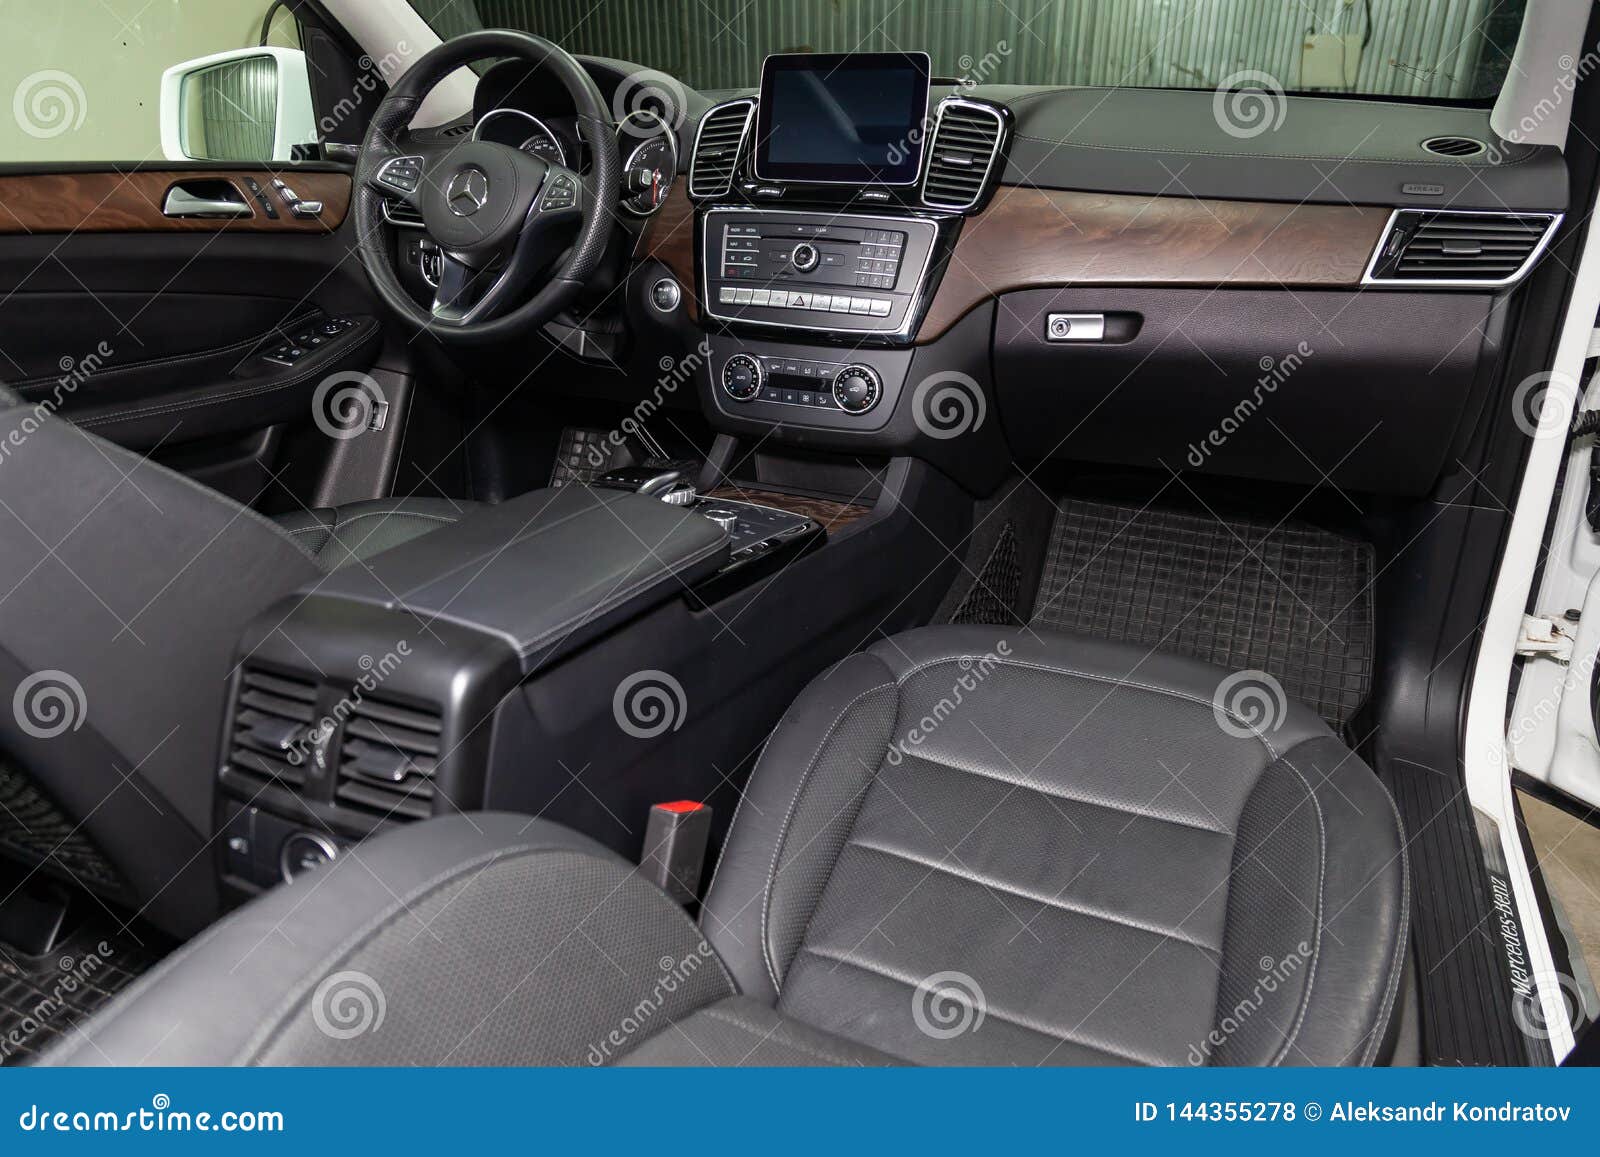 Interior View With Steering Wheel Front Seats And Dashboard